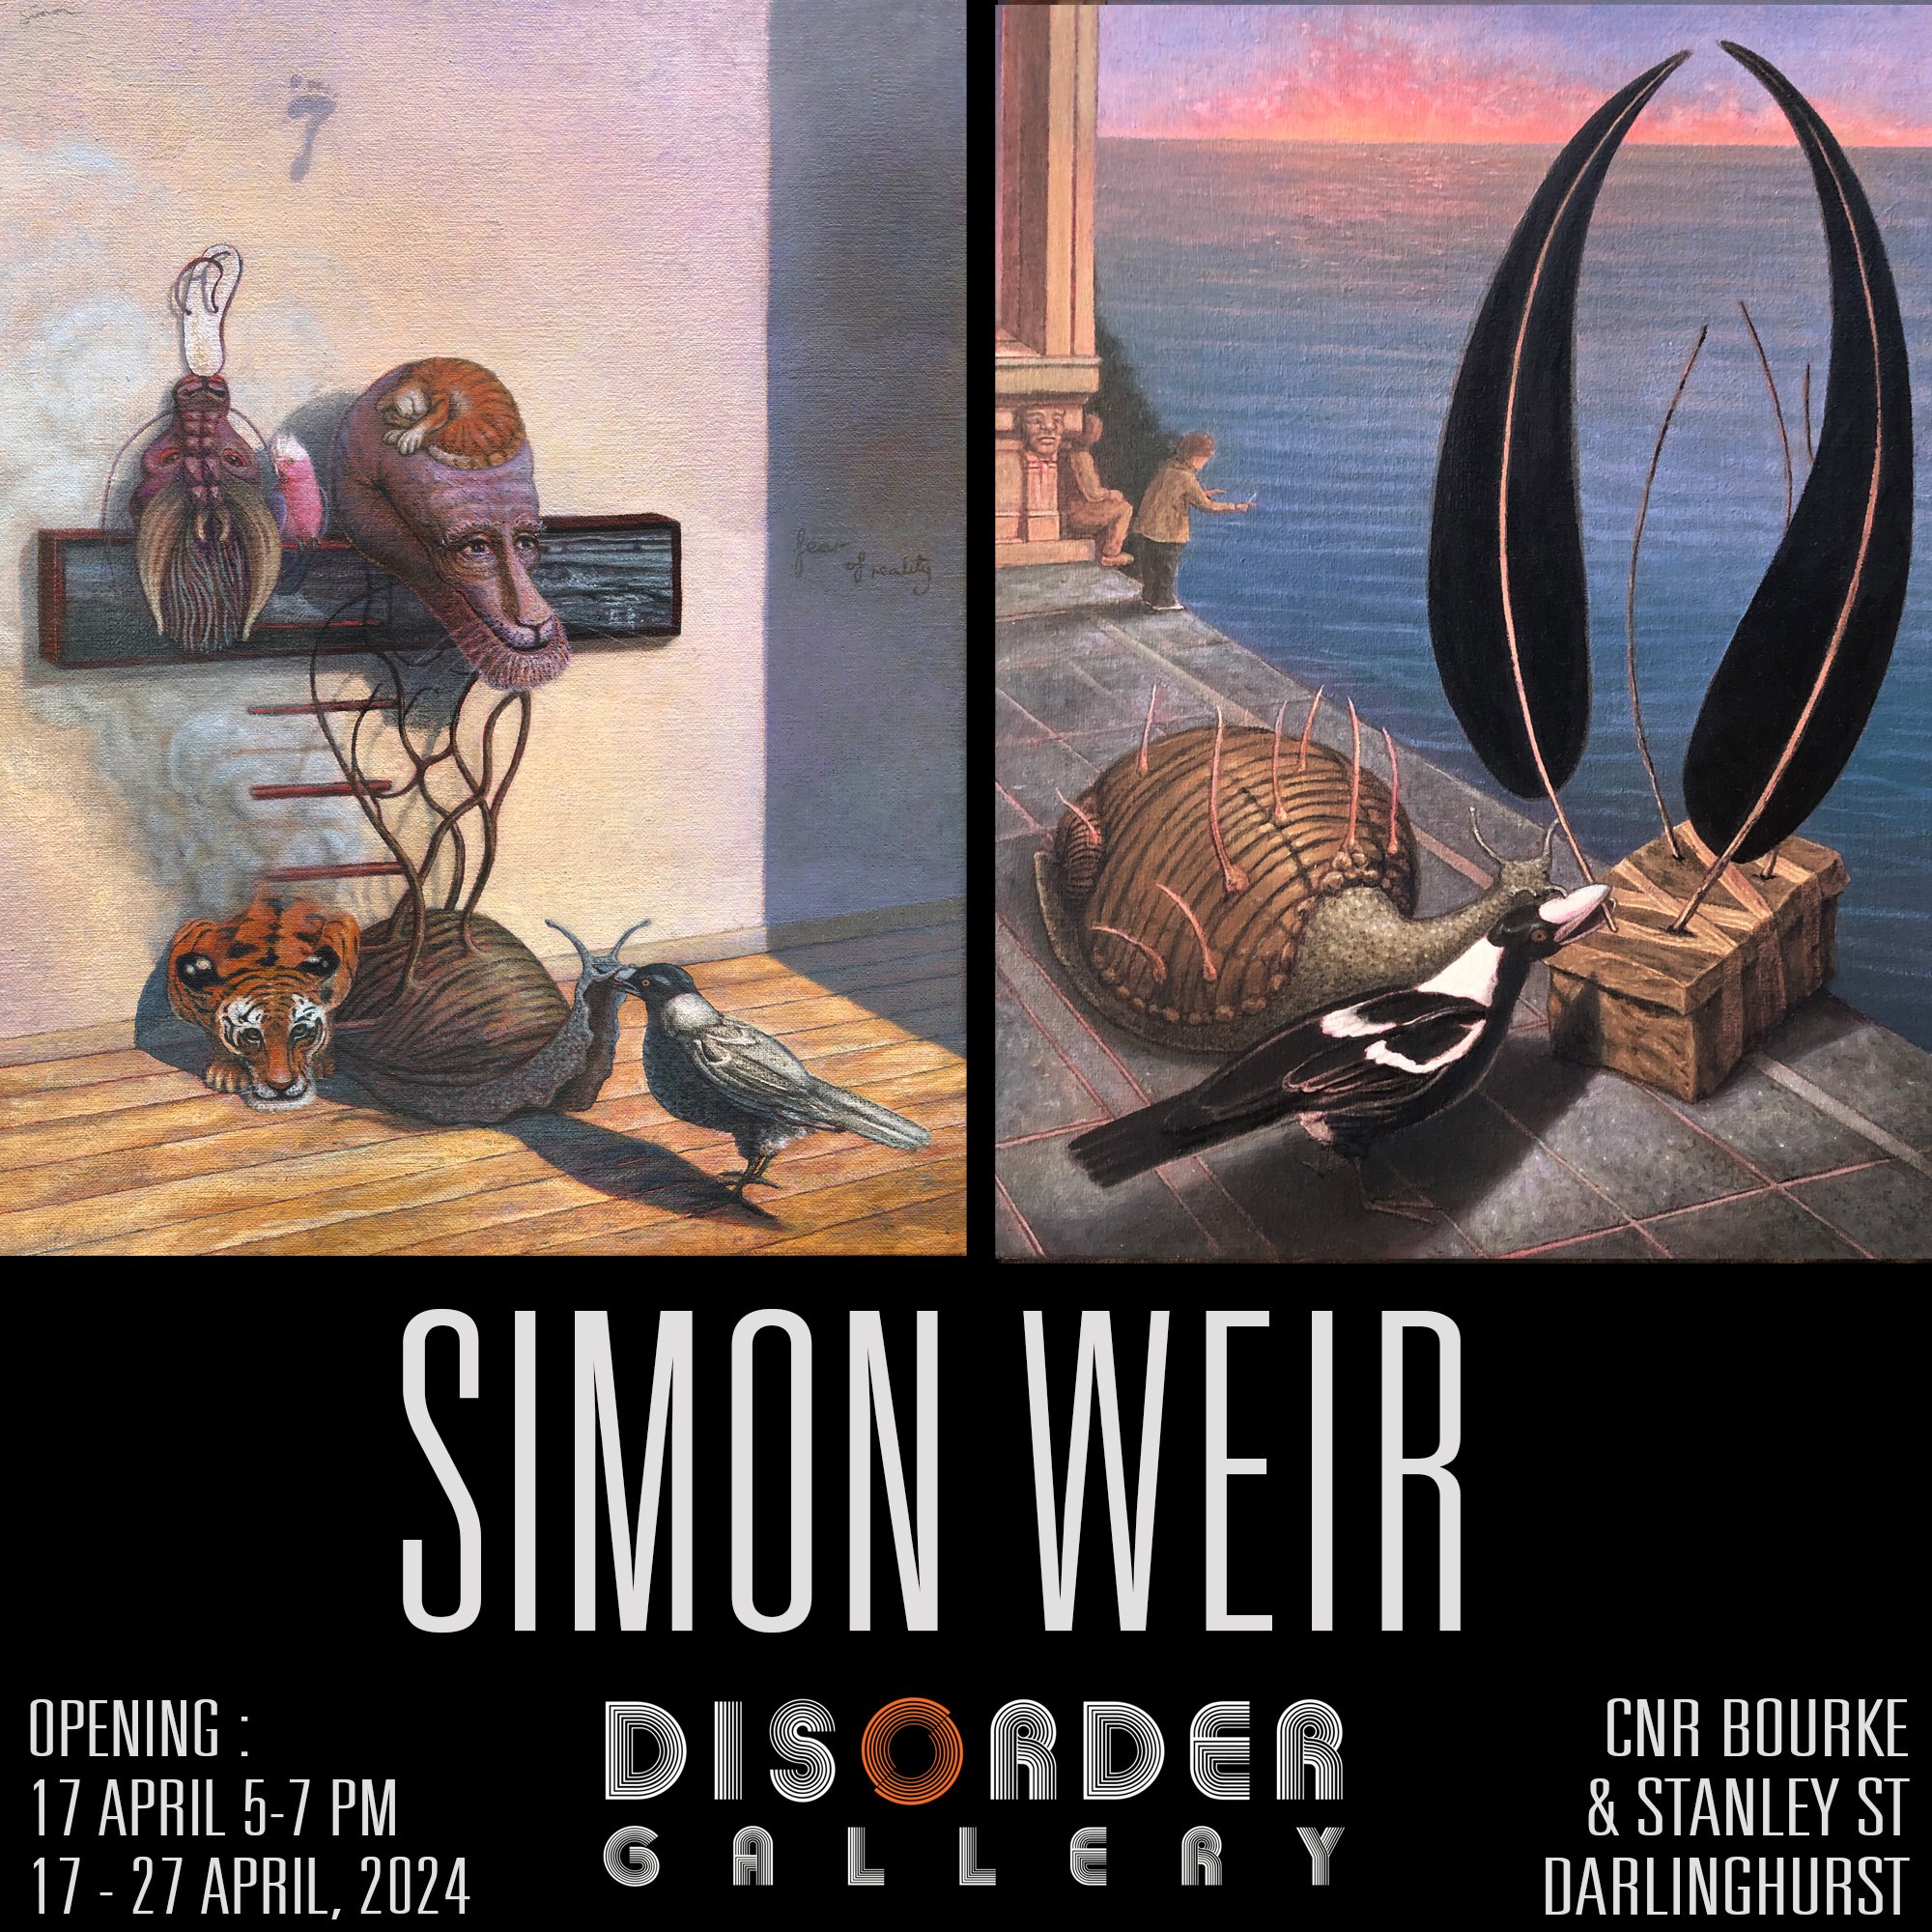 New Solo Exhibition at Disorder Gallery, Opens Wednesday April 17, 5-7pm.